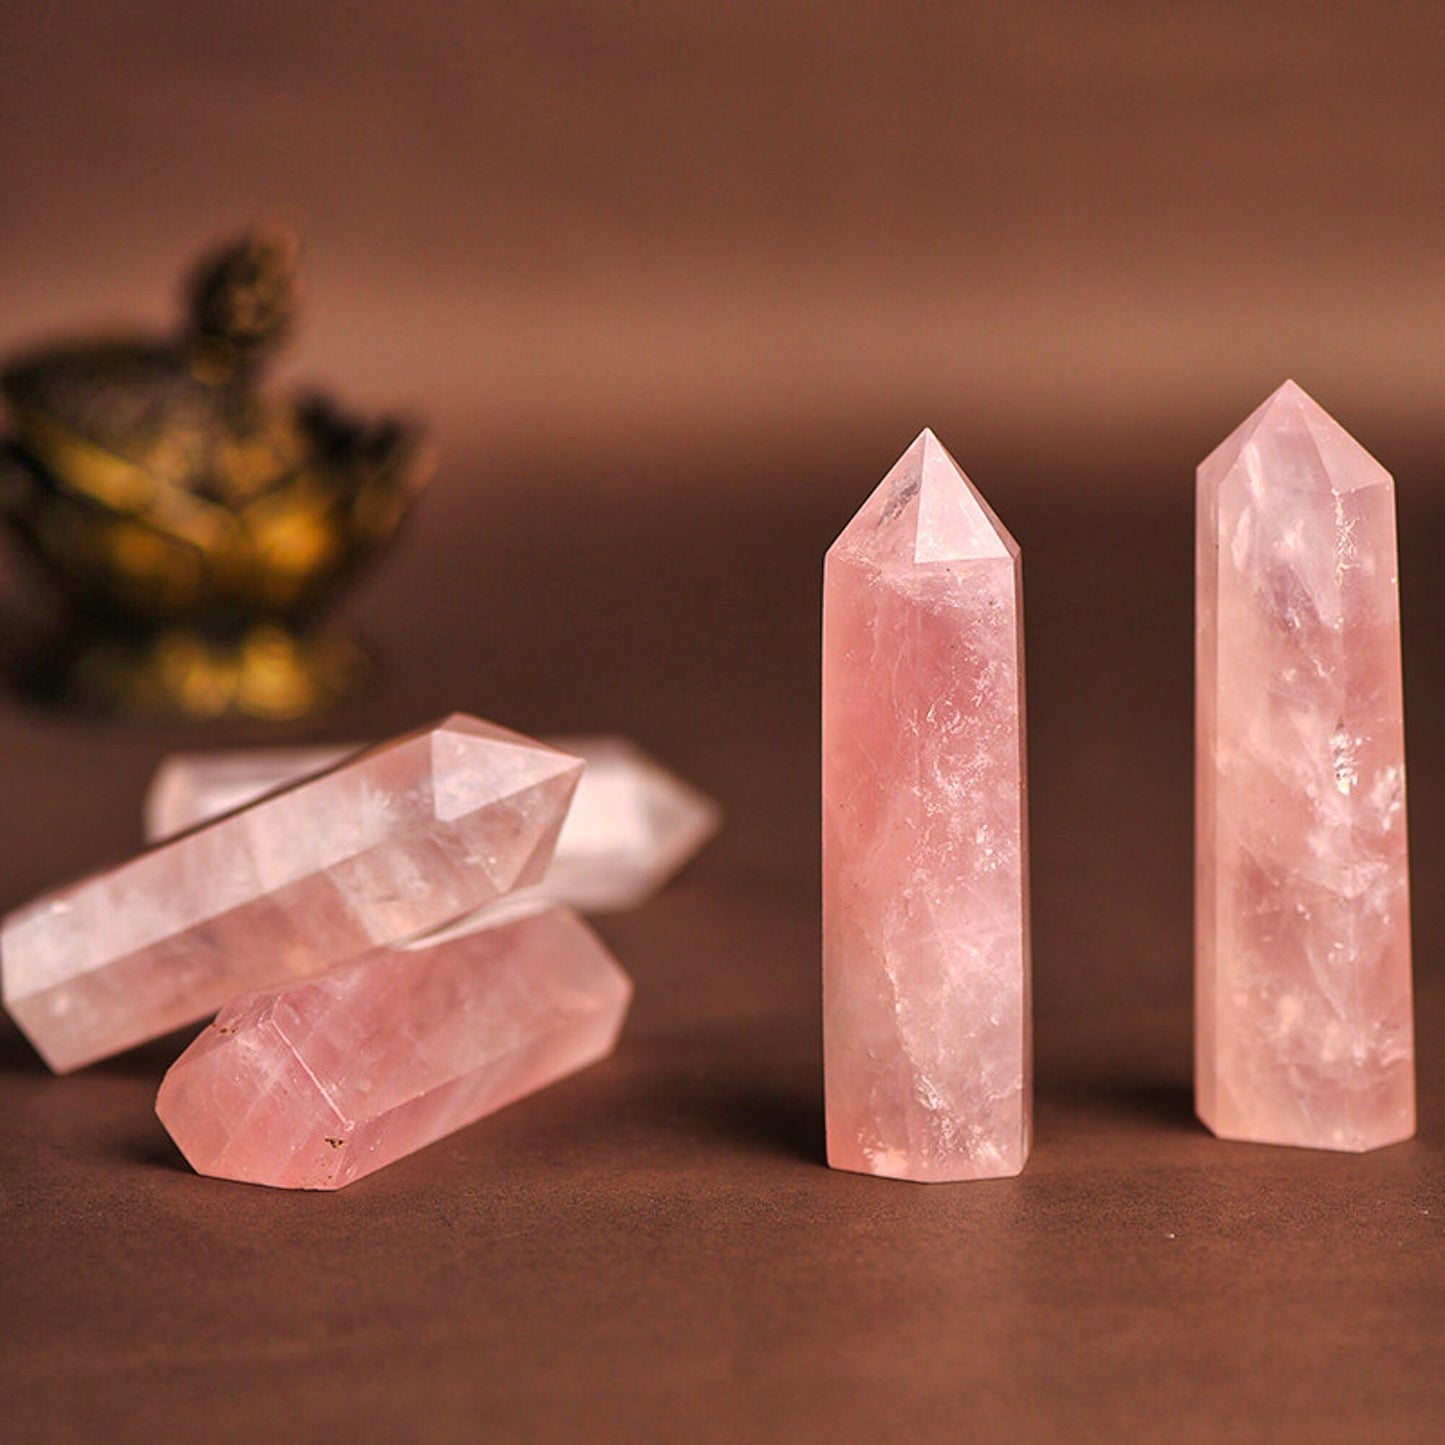 Natural Rose Quartz Crystal Wand Point - Healing Mineral Stone for DIY Home Decor and Treatment